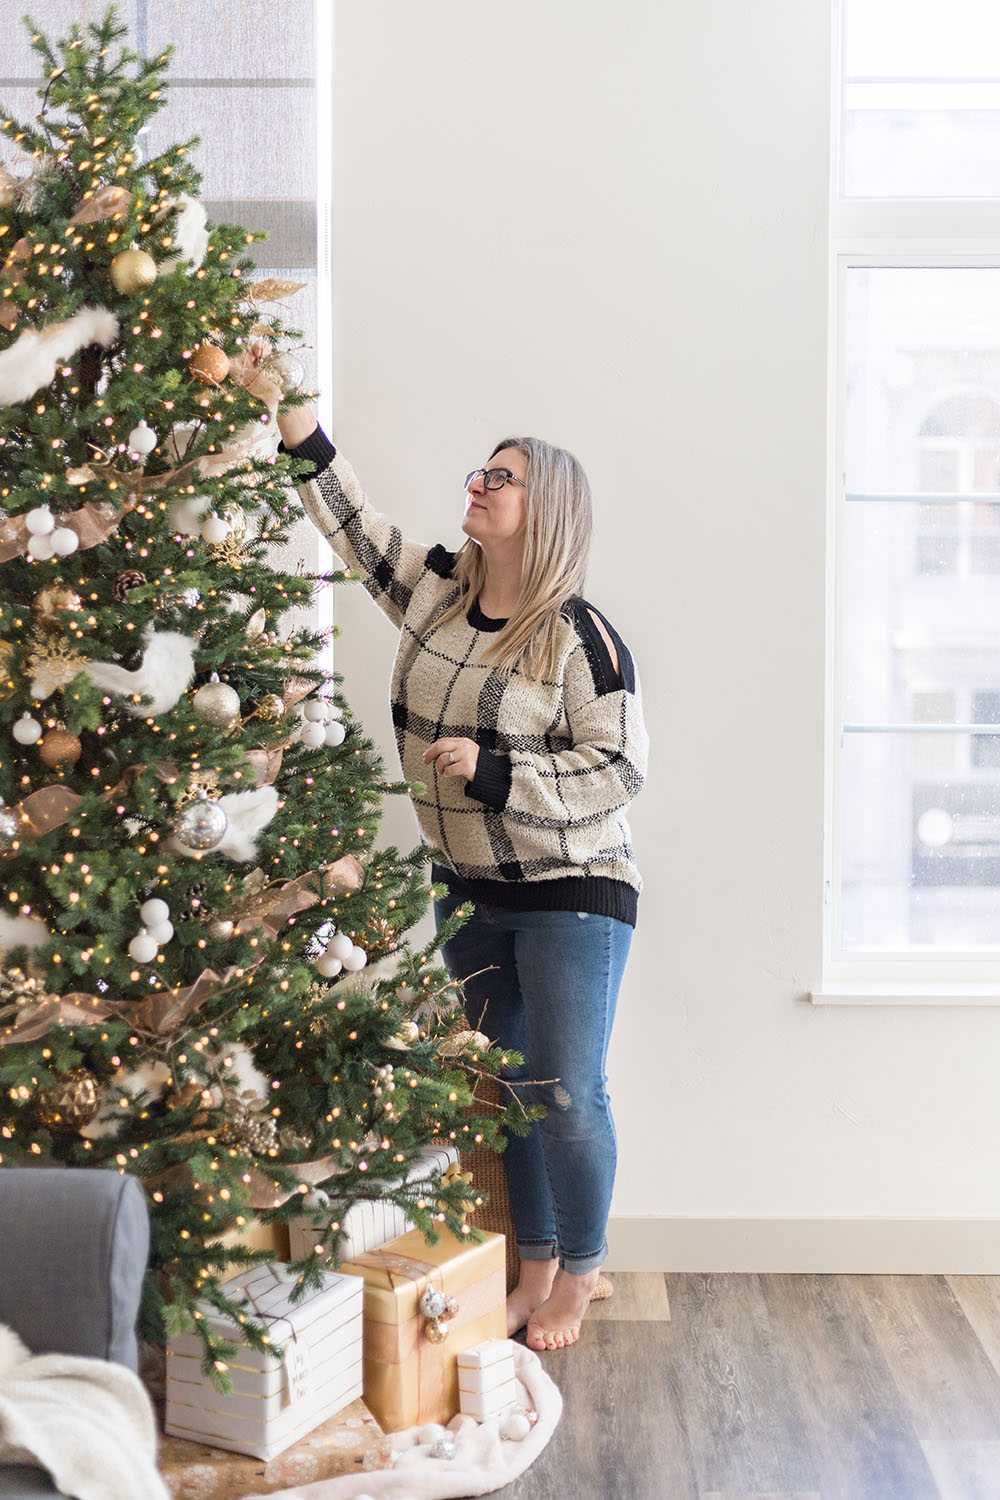 A woman stands on hardwood floors while decorating a Christmas tree.